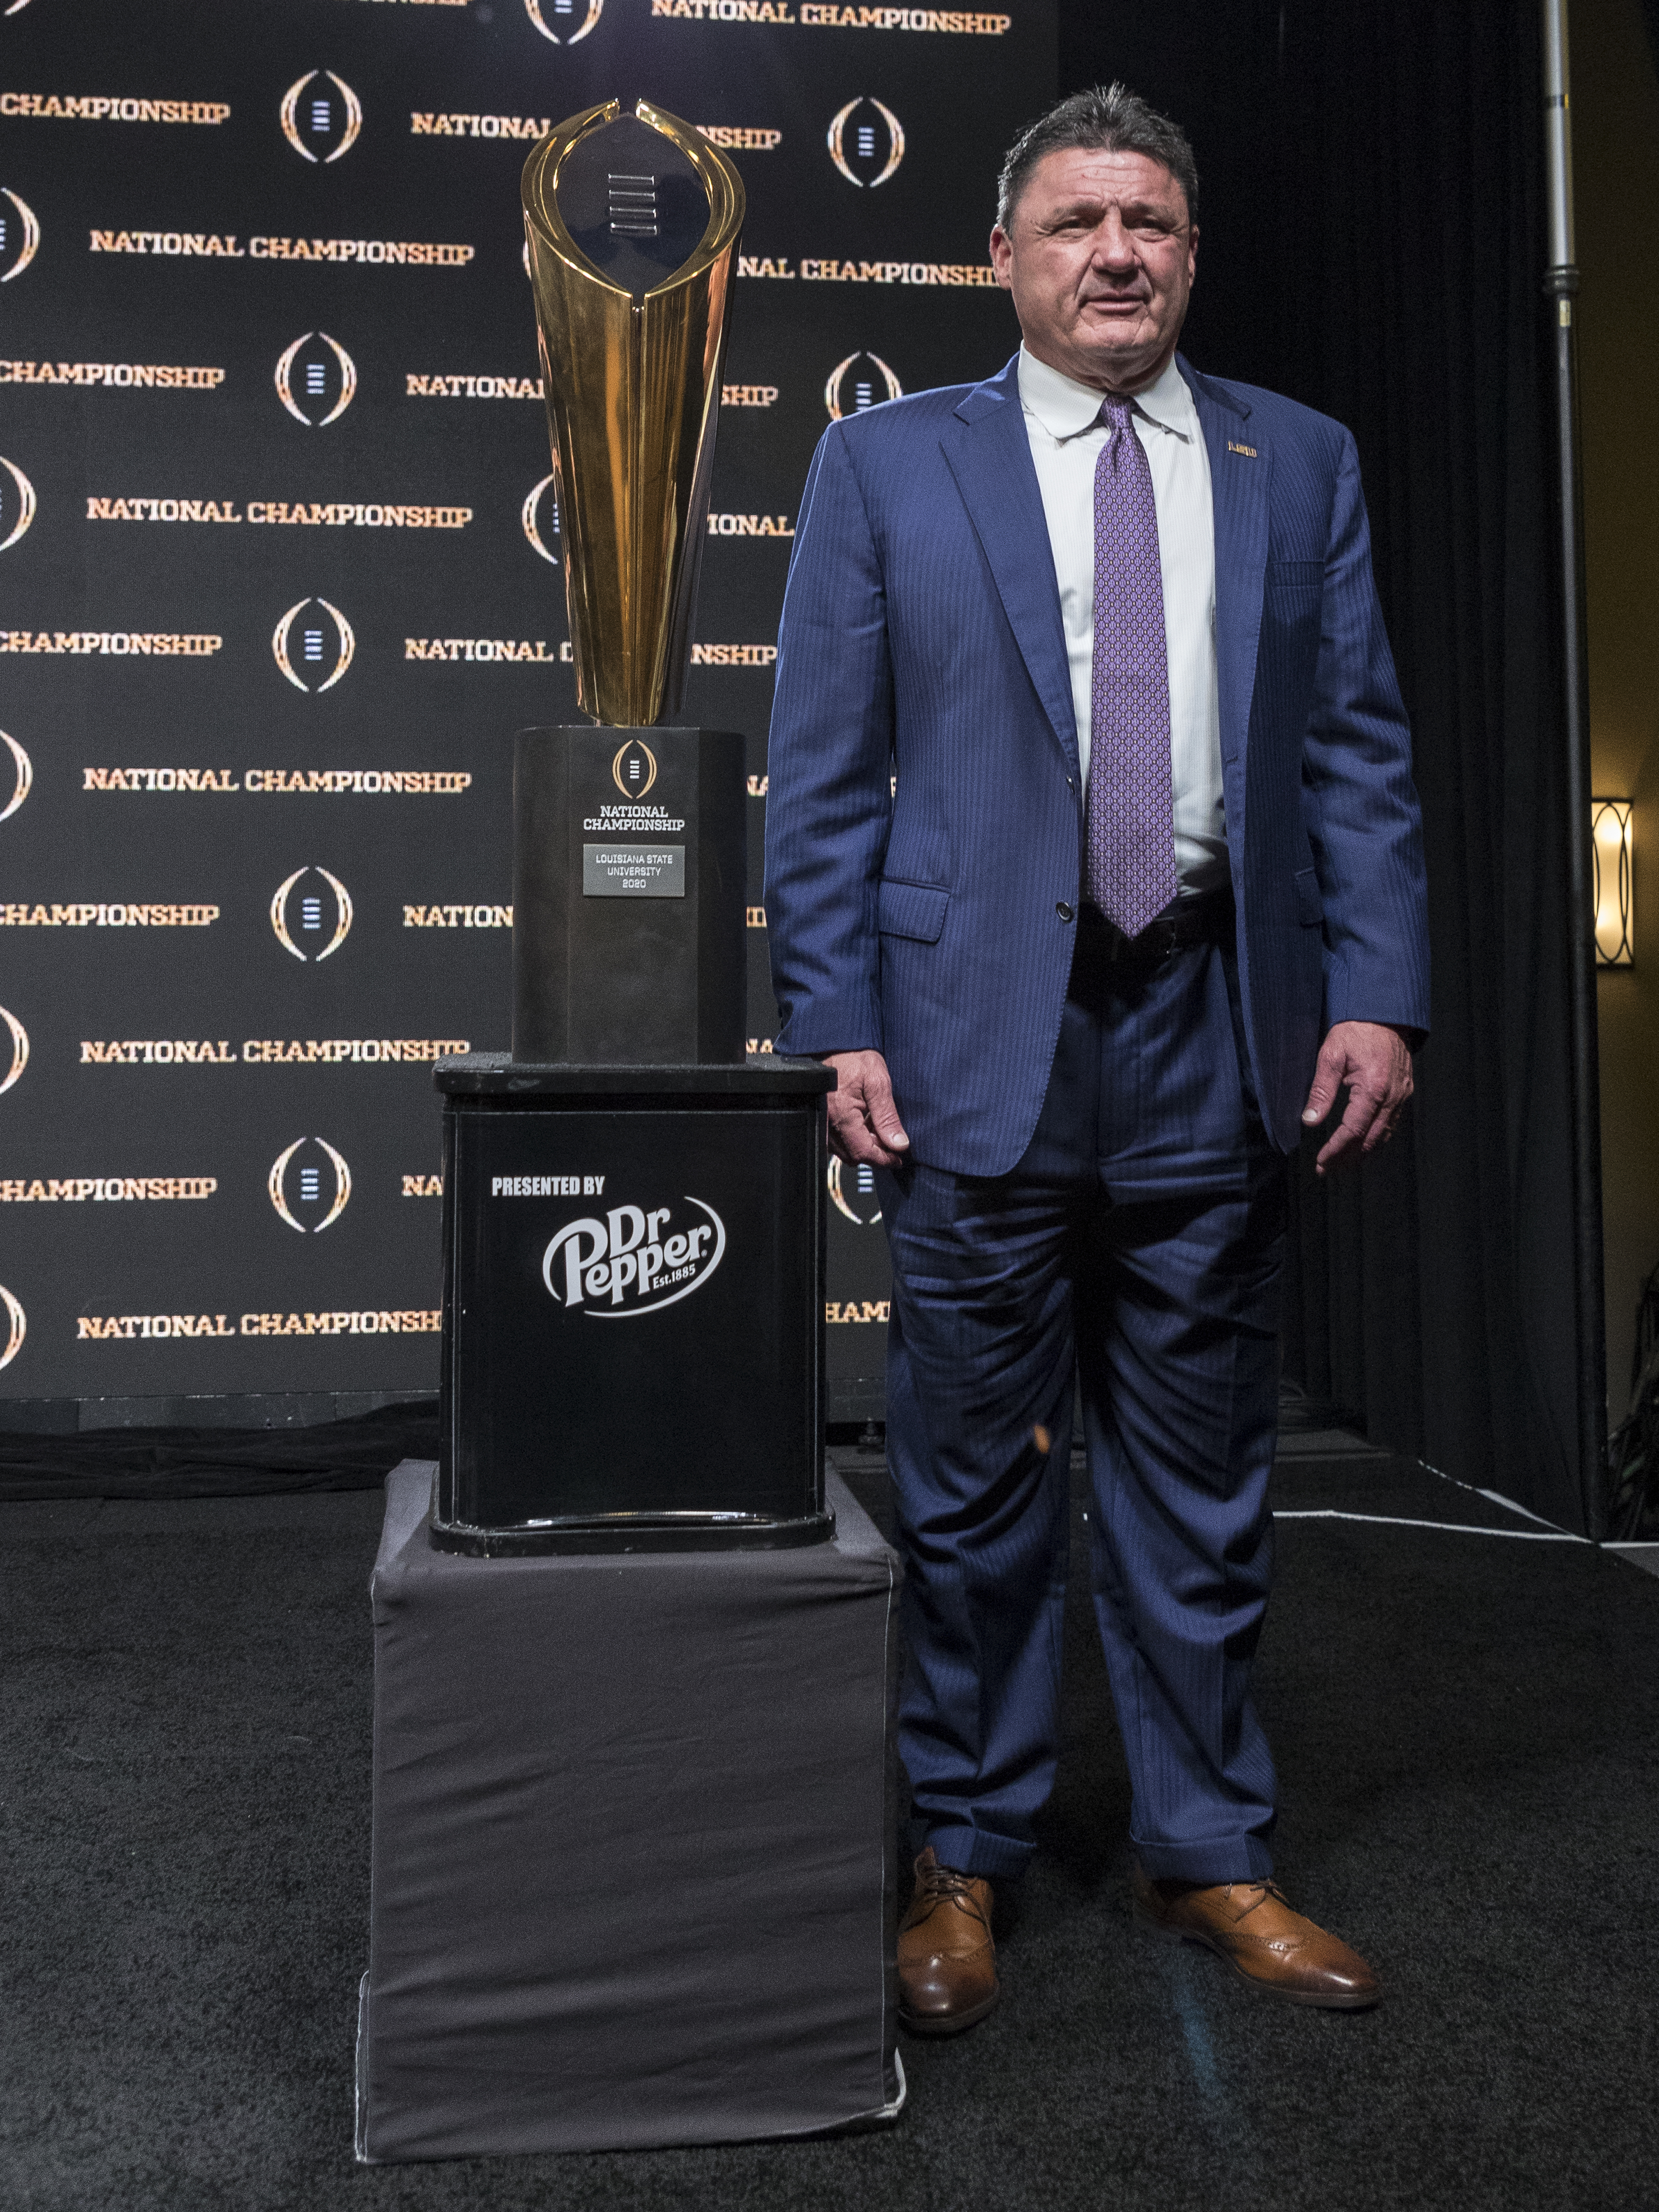 College Football Playoff National Championship - Winning Press Conference Conference